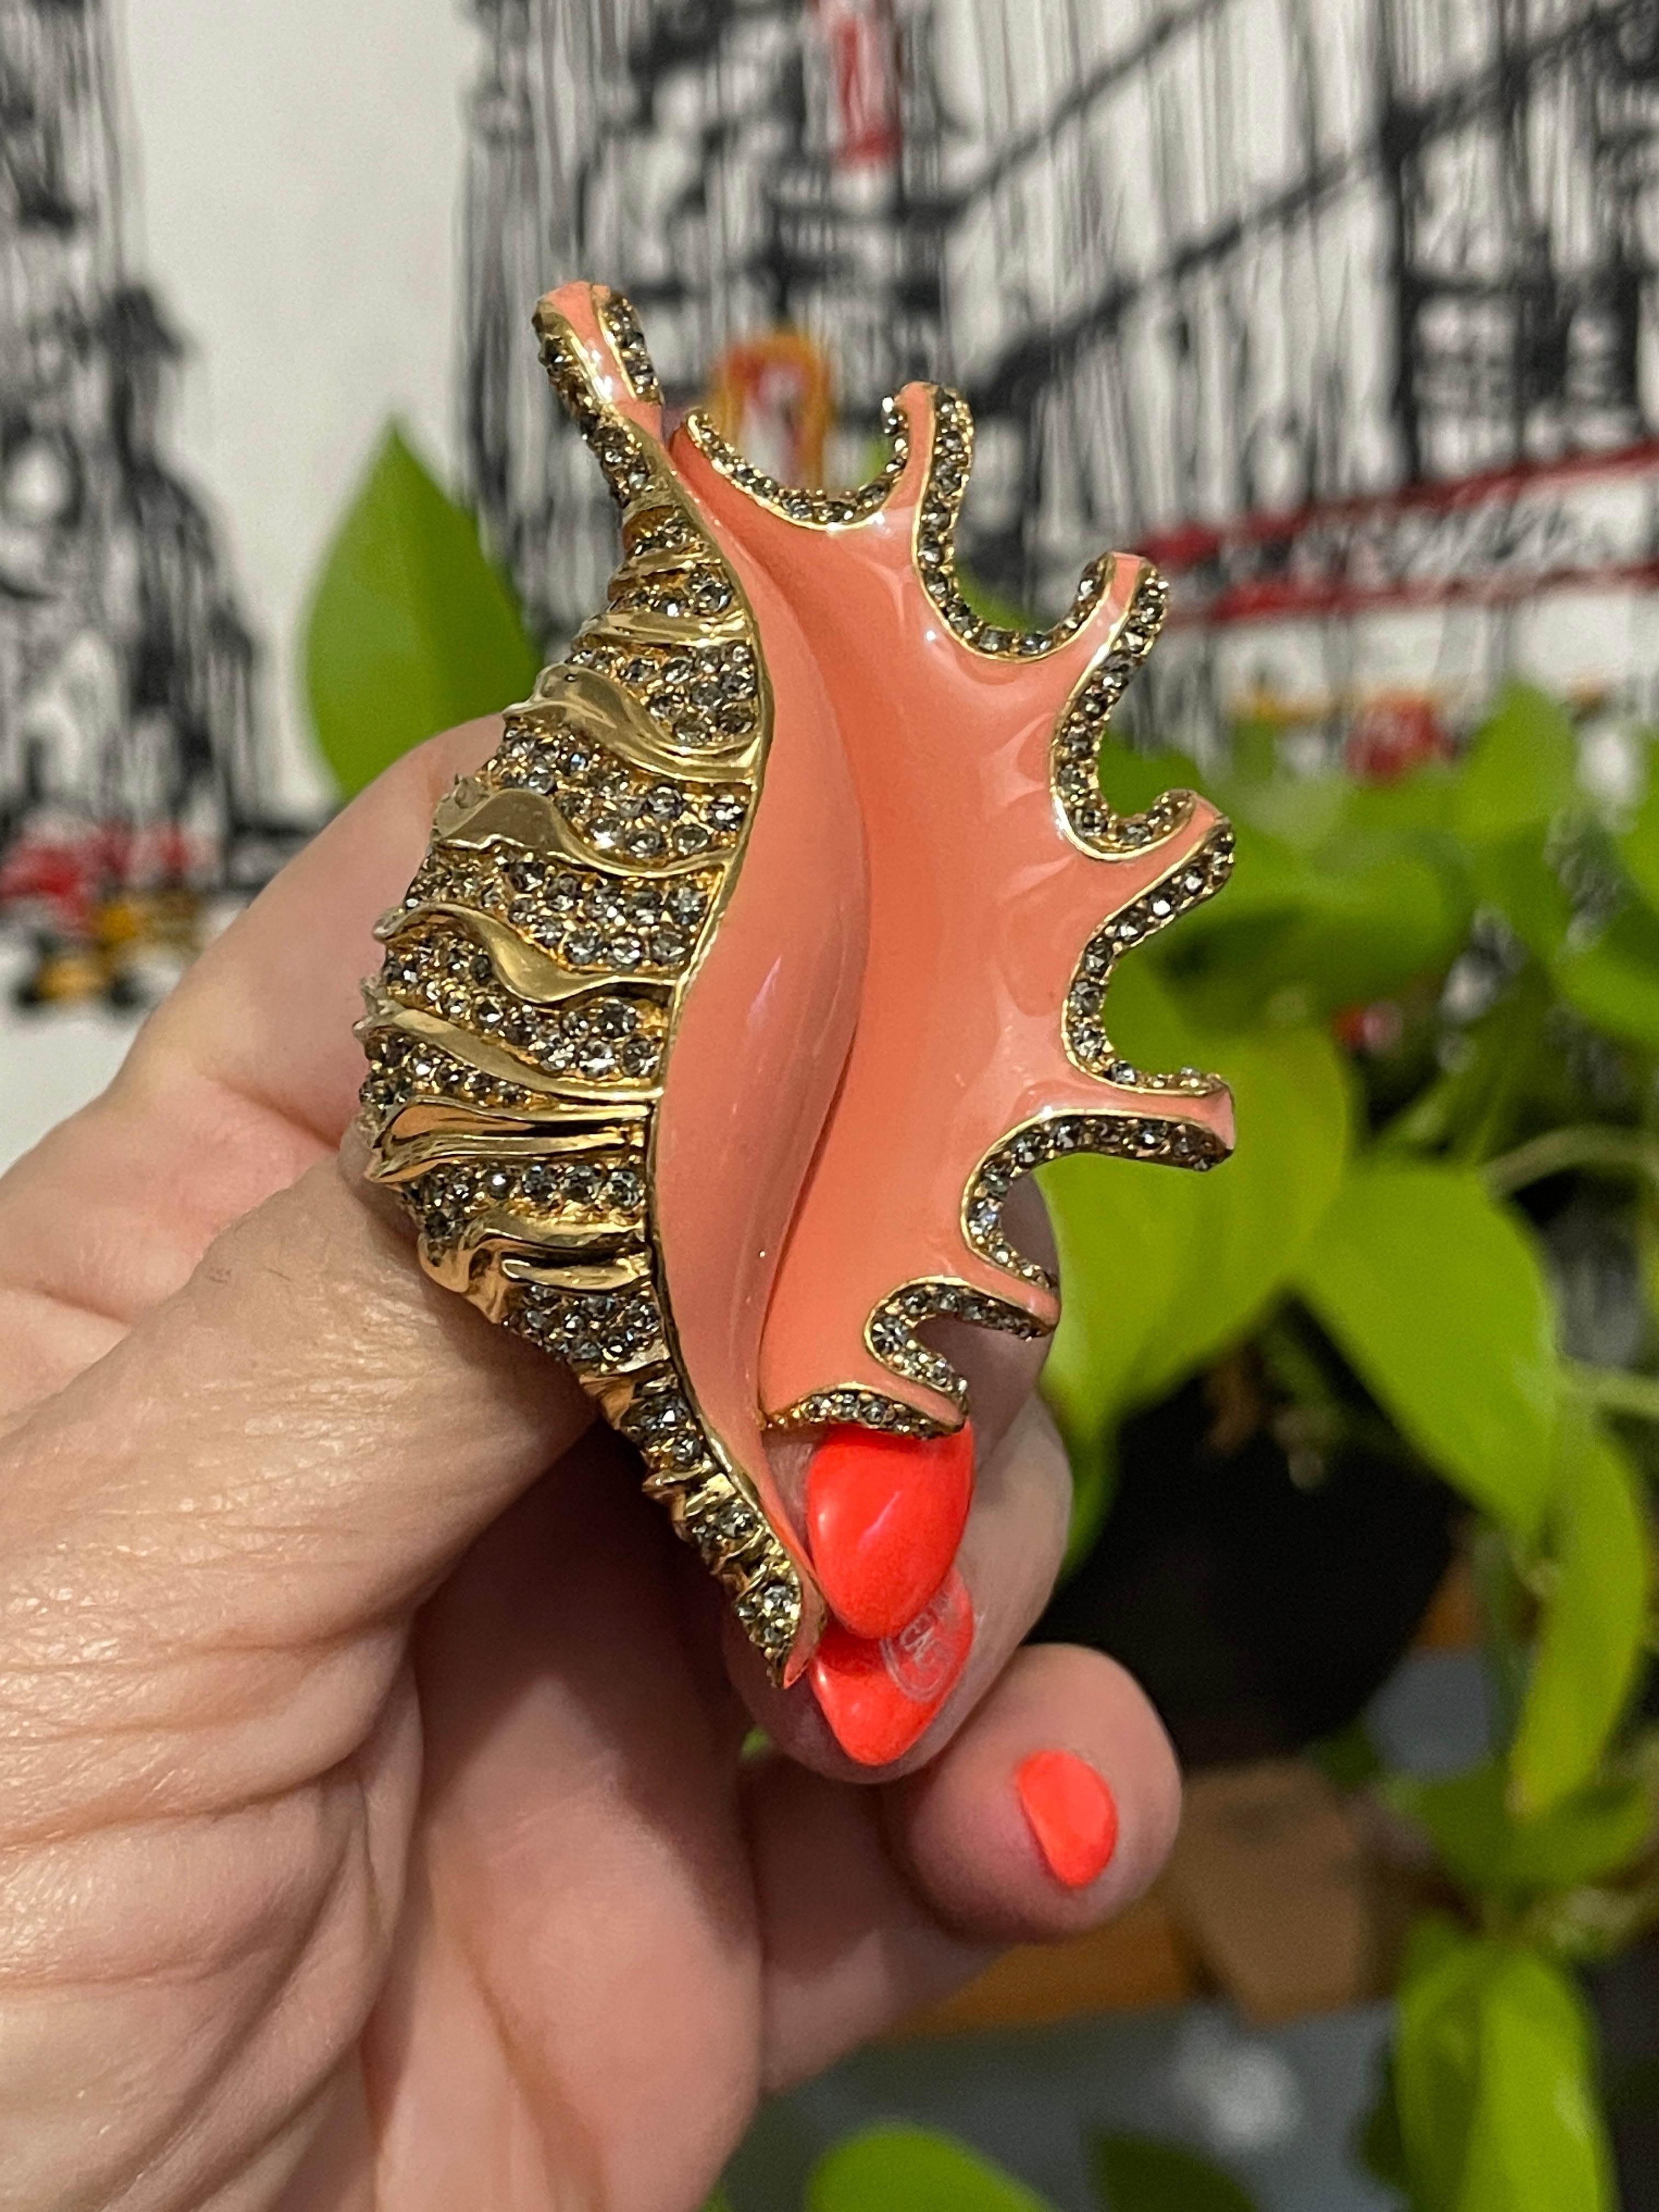  Ciner Conch Shell Enamel Brooch Pin Swarovski Crystals New, Never Worn 1980s In New Condition For Sale In Wallkill, NY